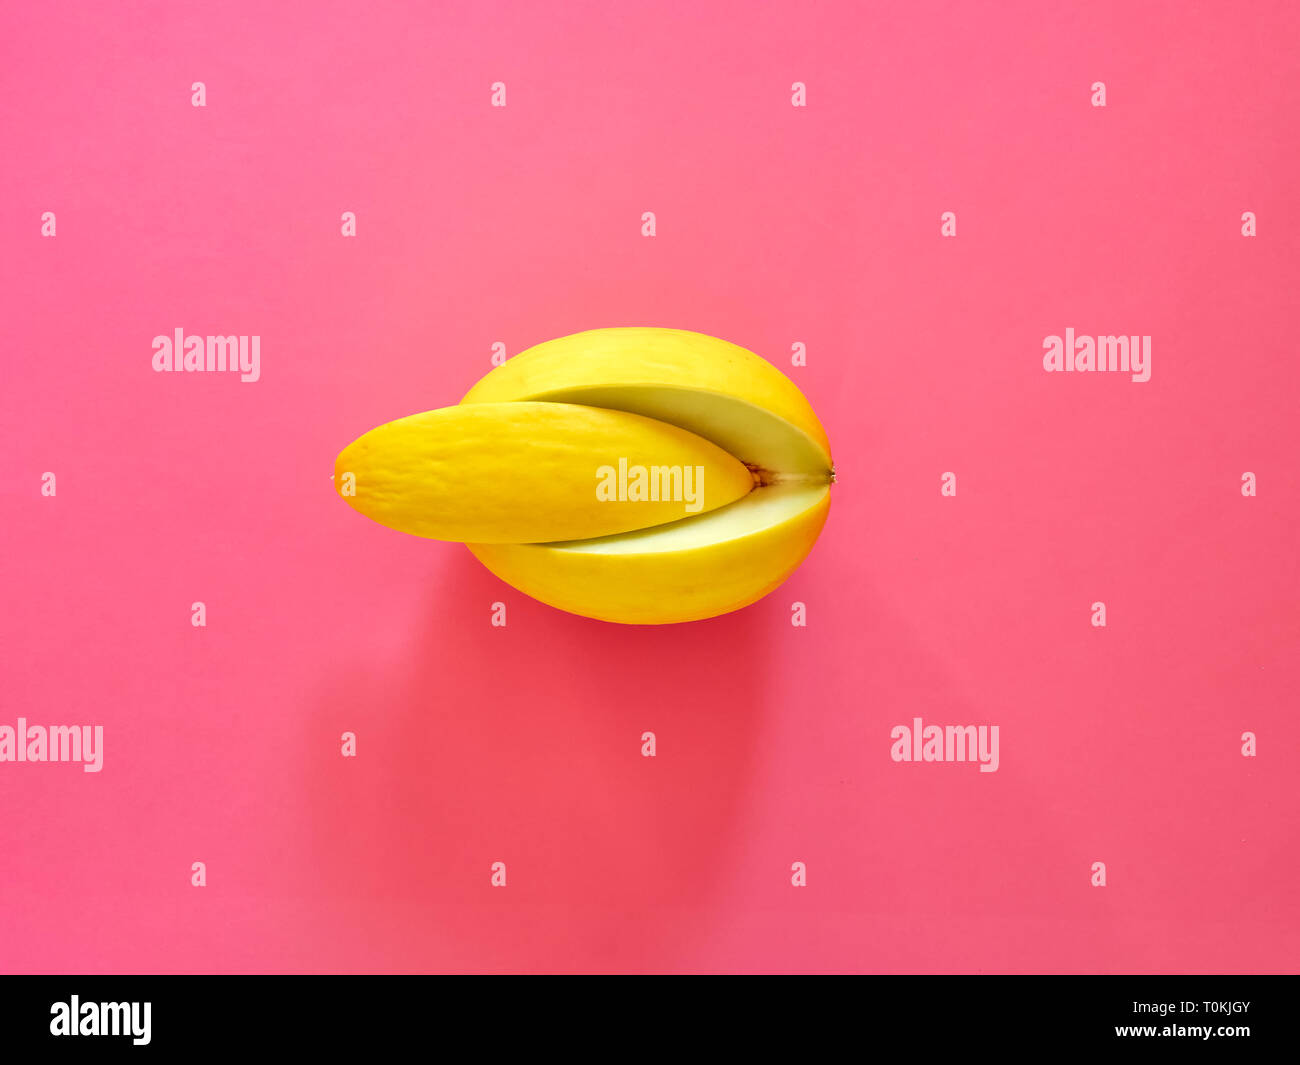 Yellow Melon Fruit isolated in fucsia background viewed from above - flatlay look - Image Minimalism concept Stock Photo